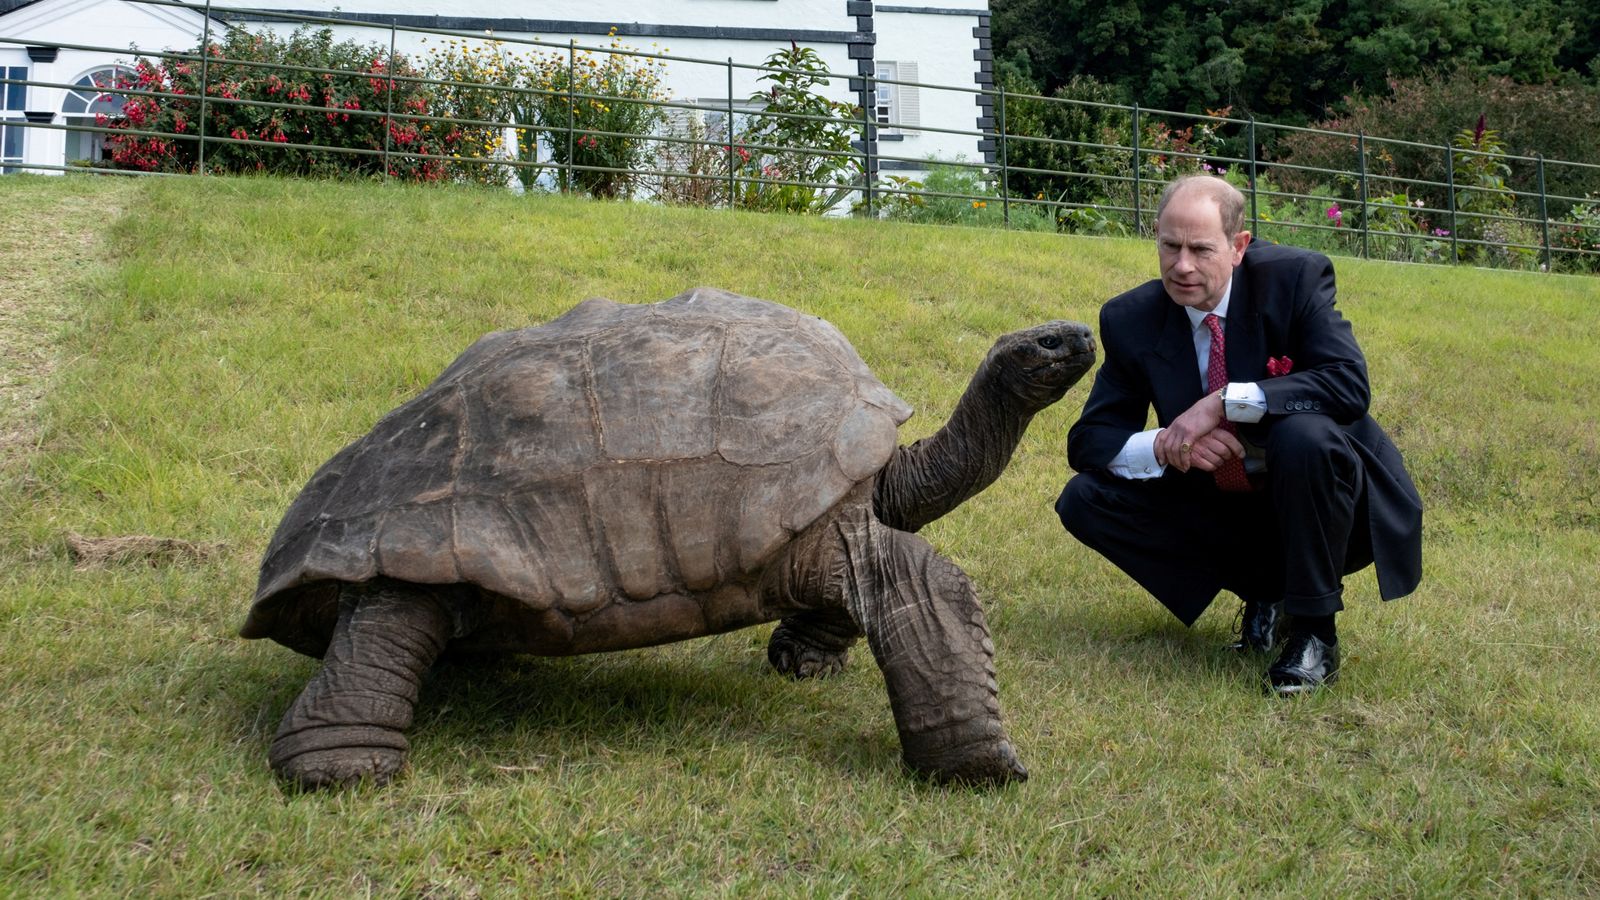 Prince Edward meets world's oldest living land animal - who was alive during Queen Victoria's reign